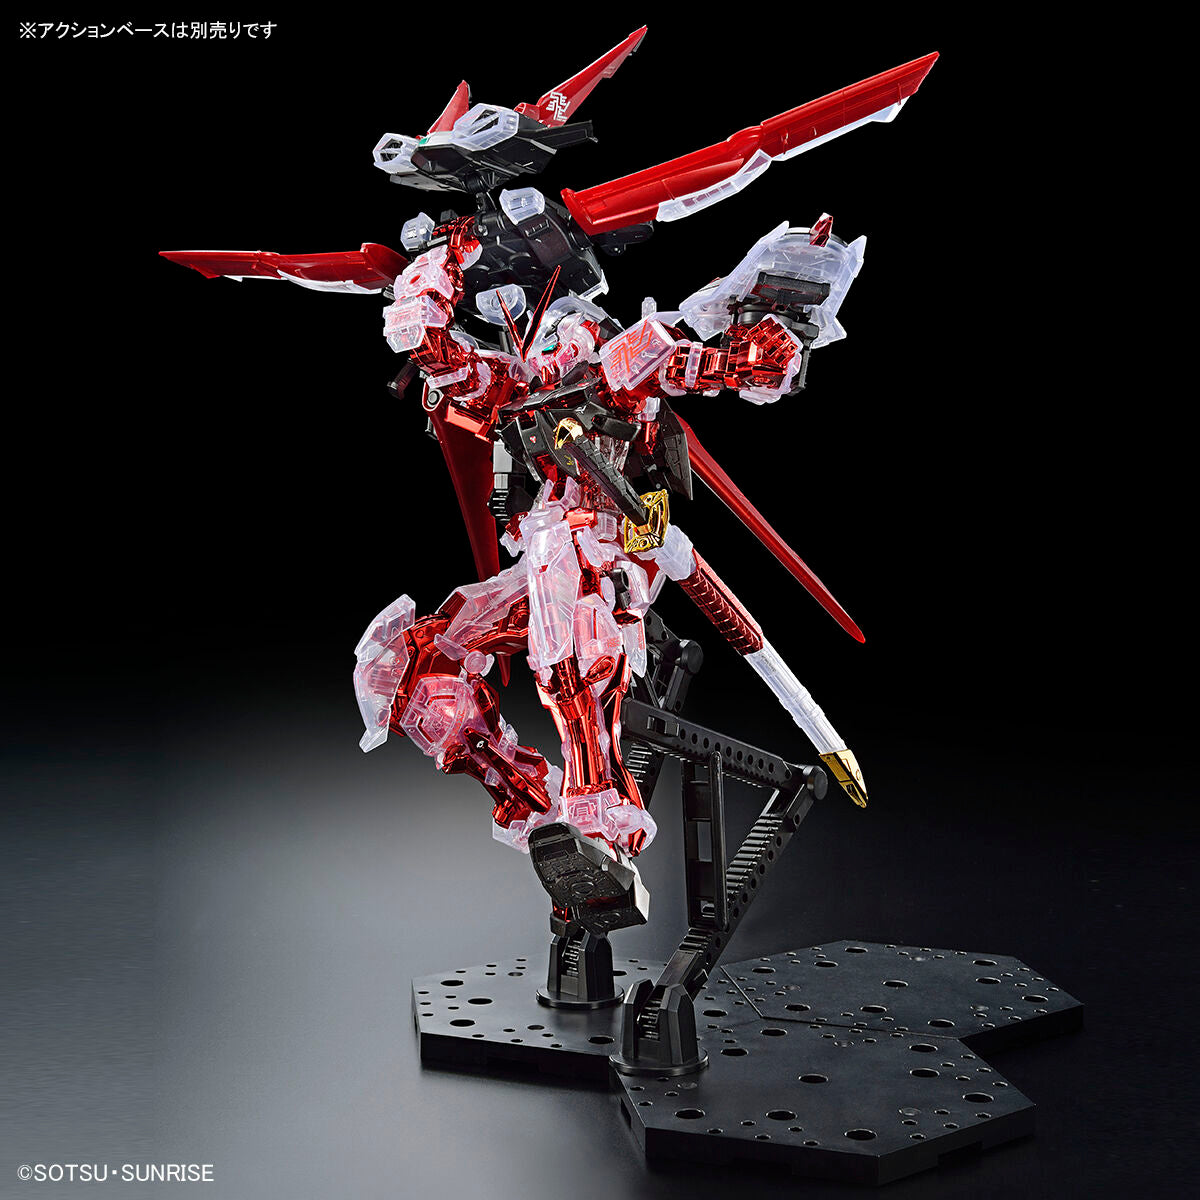 Gundam Base Limited MG 1/100 Gundam Astray Red Frame Flight Unit Plated Frame / Color Clear